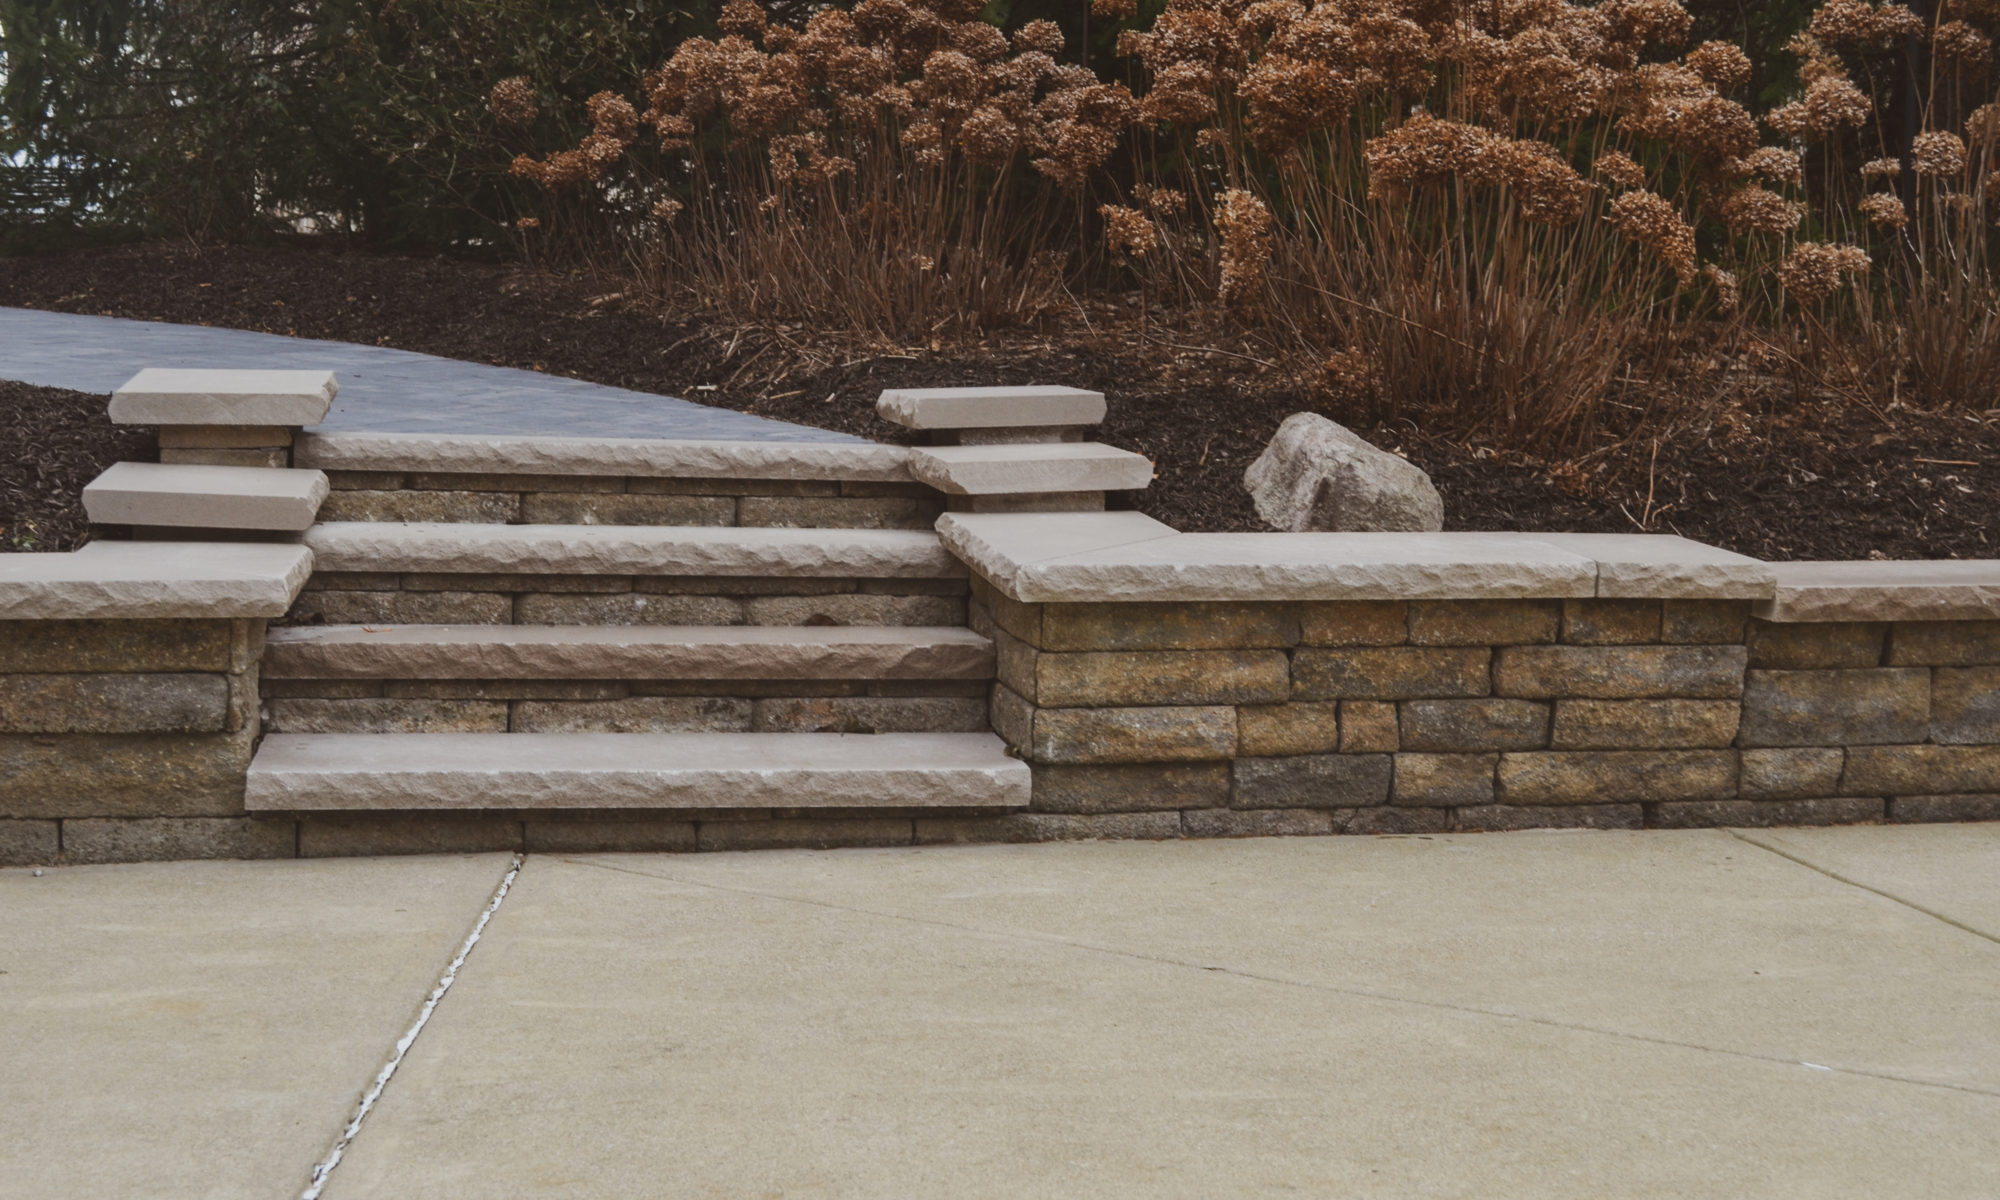 Precision Outdoors Sunken Paver Patio raised deck retaining wall terraced landscaping beds Zionsville indiana beautiful backyard